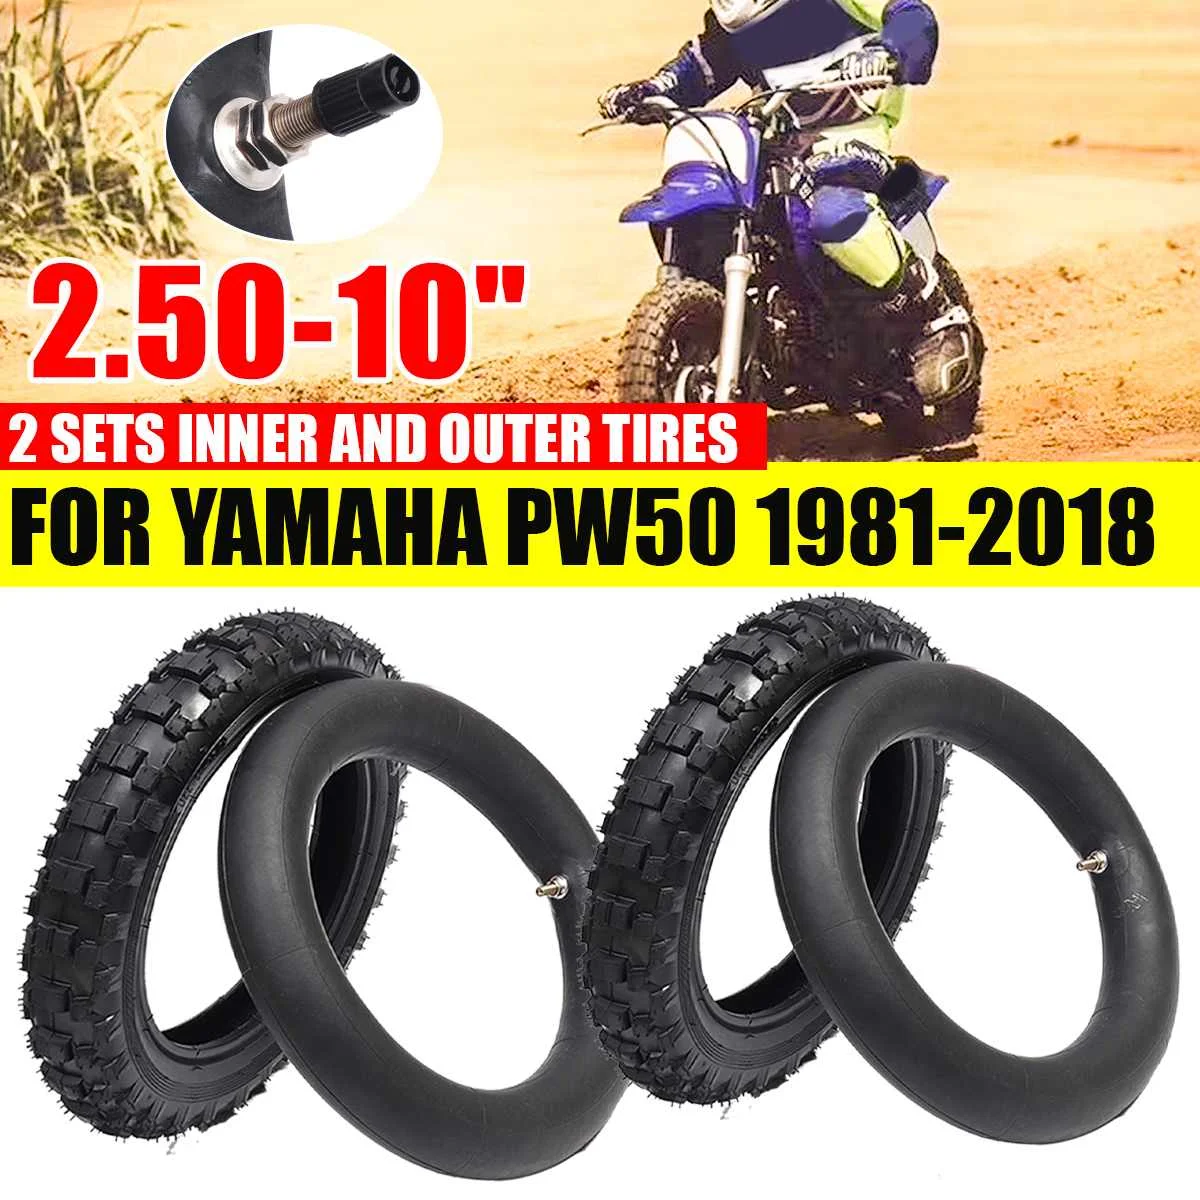 Maxxis Pit Dirt Bike Yamaha PW50 Pair of Front Rear Tyres 250-10 & Inner Tubes